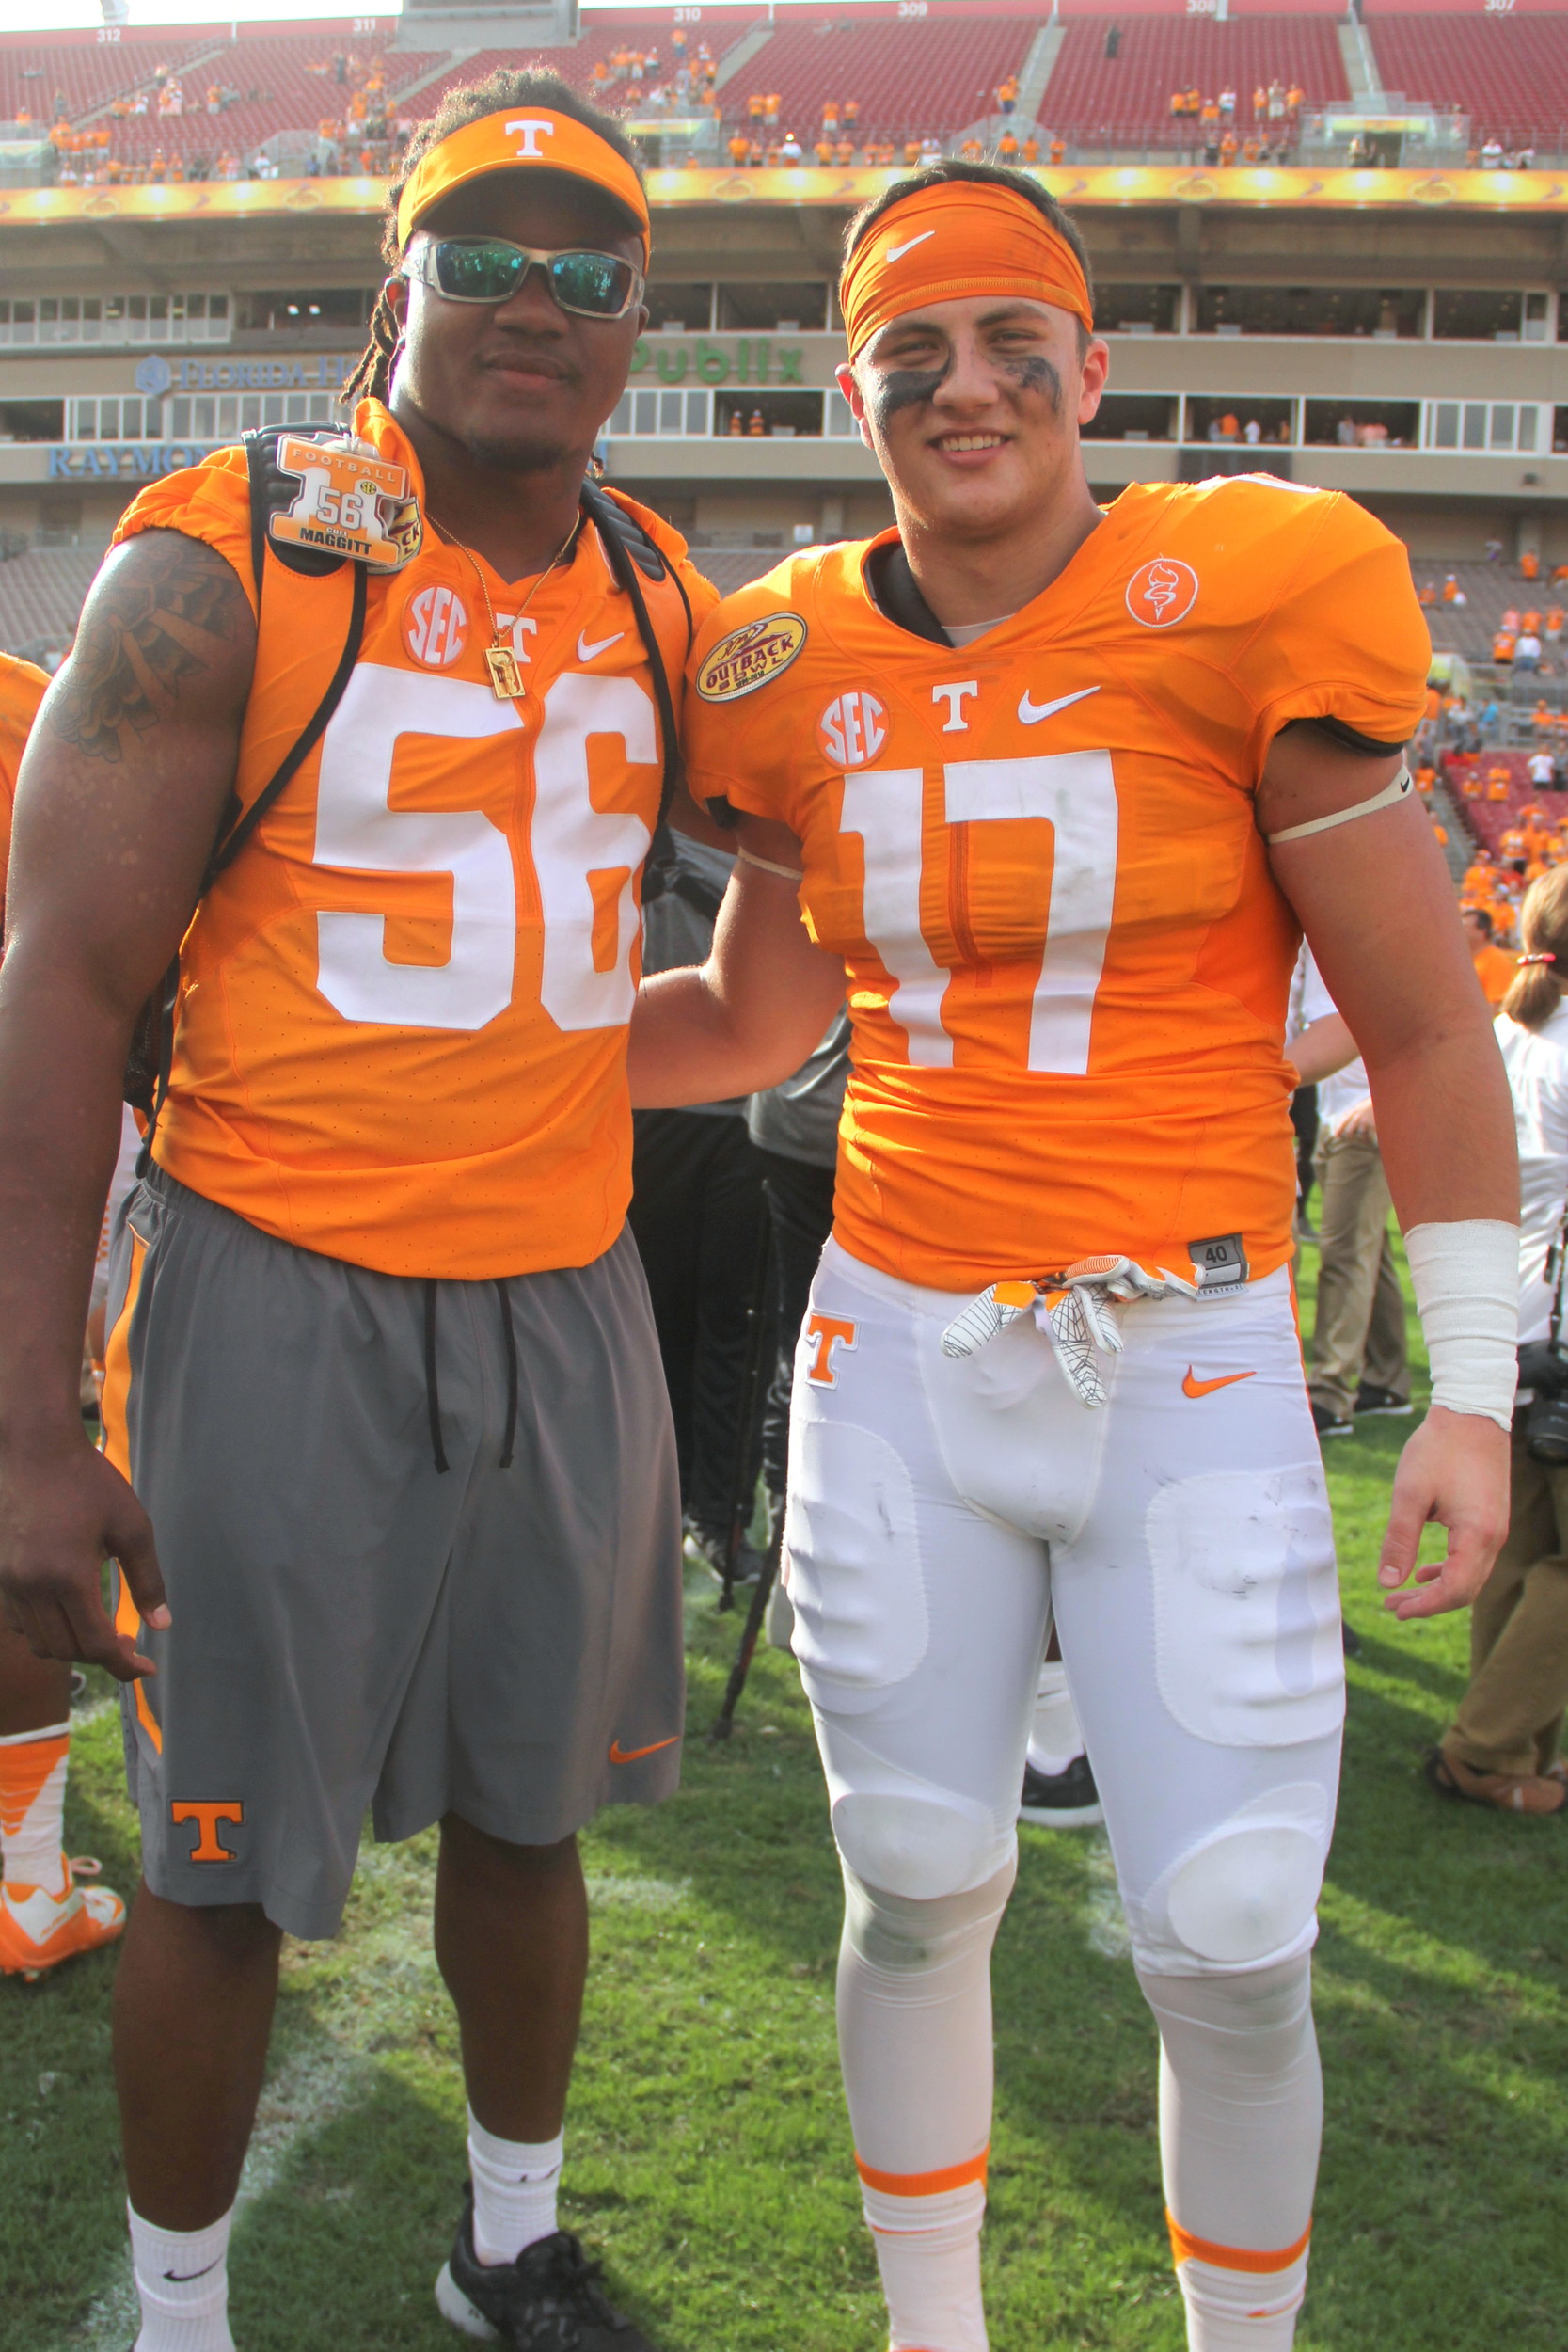 Standout fifth-year senior defensive end/linebacker Curt Maggitt (56), who injured his hip Sept. 12 against Oklahoma (left) and linebacker Dillon Bates (17) of Ponte Vedra Beach after Tennessee’s Outback Bowl win over Northwestern in Tampa.